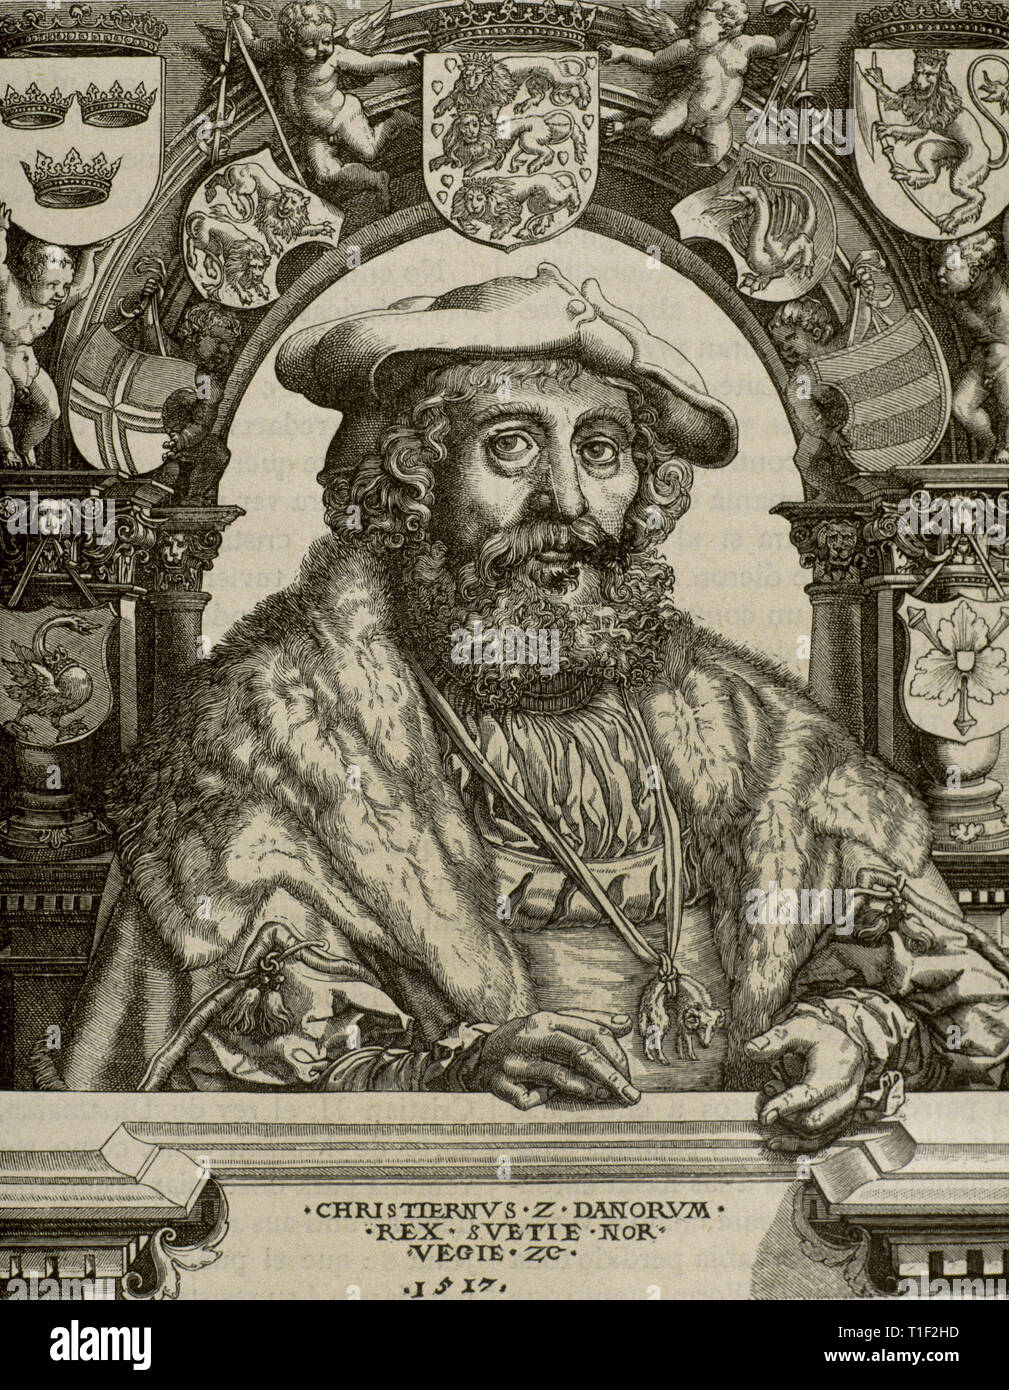 Christian II (1481-1559). King of Denmark, Norway and Sweden. Christian II with the arms of his Kingdom. Engraving by Jacob Brink (1500-1569). Stock Photo